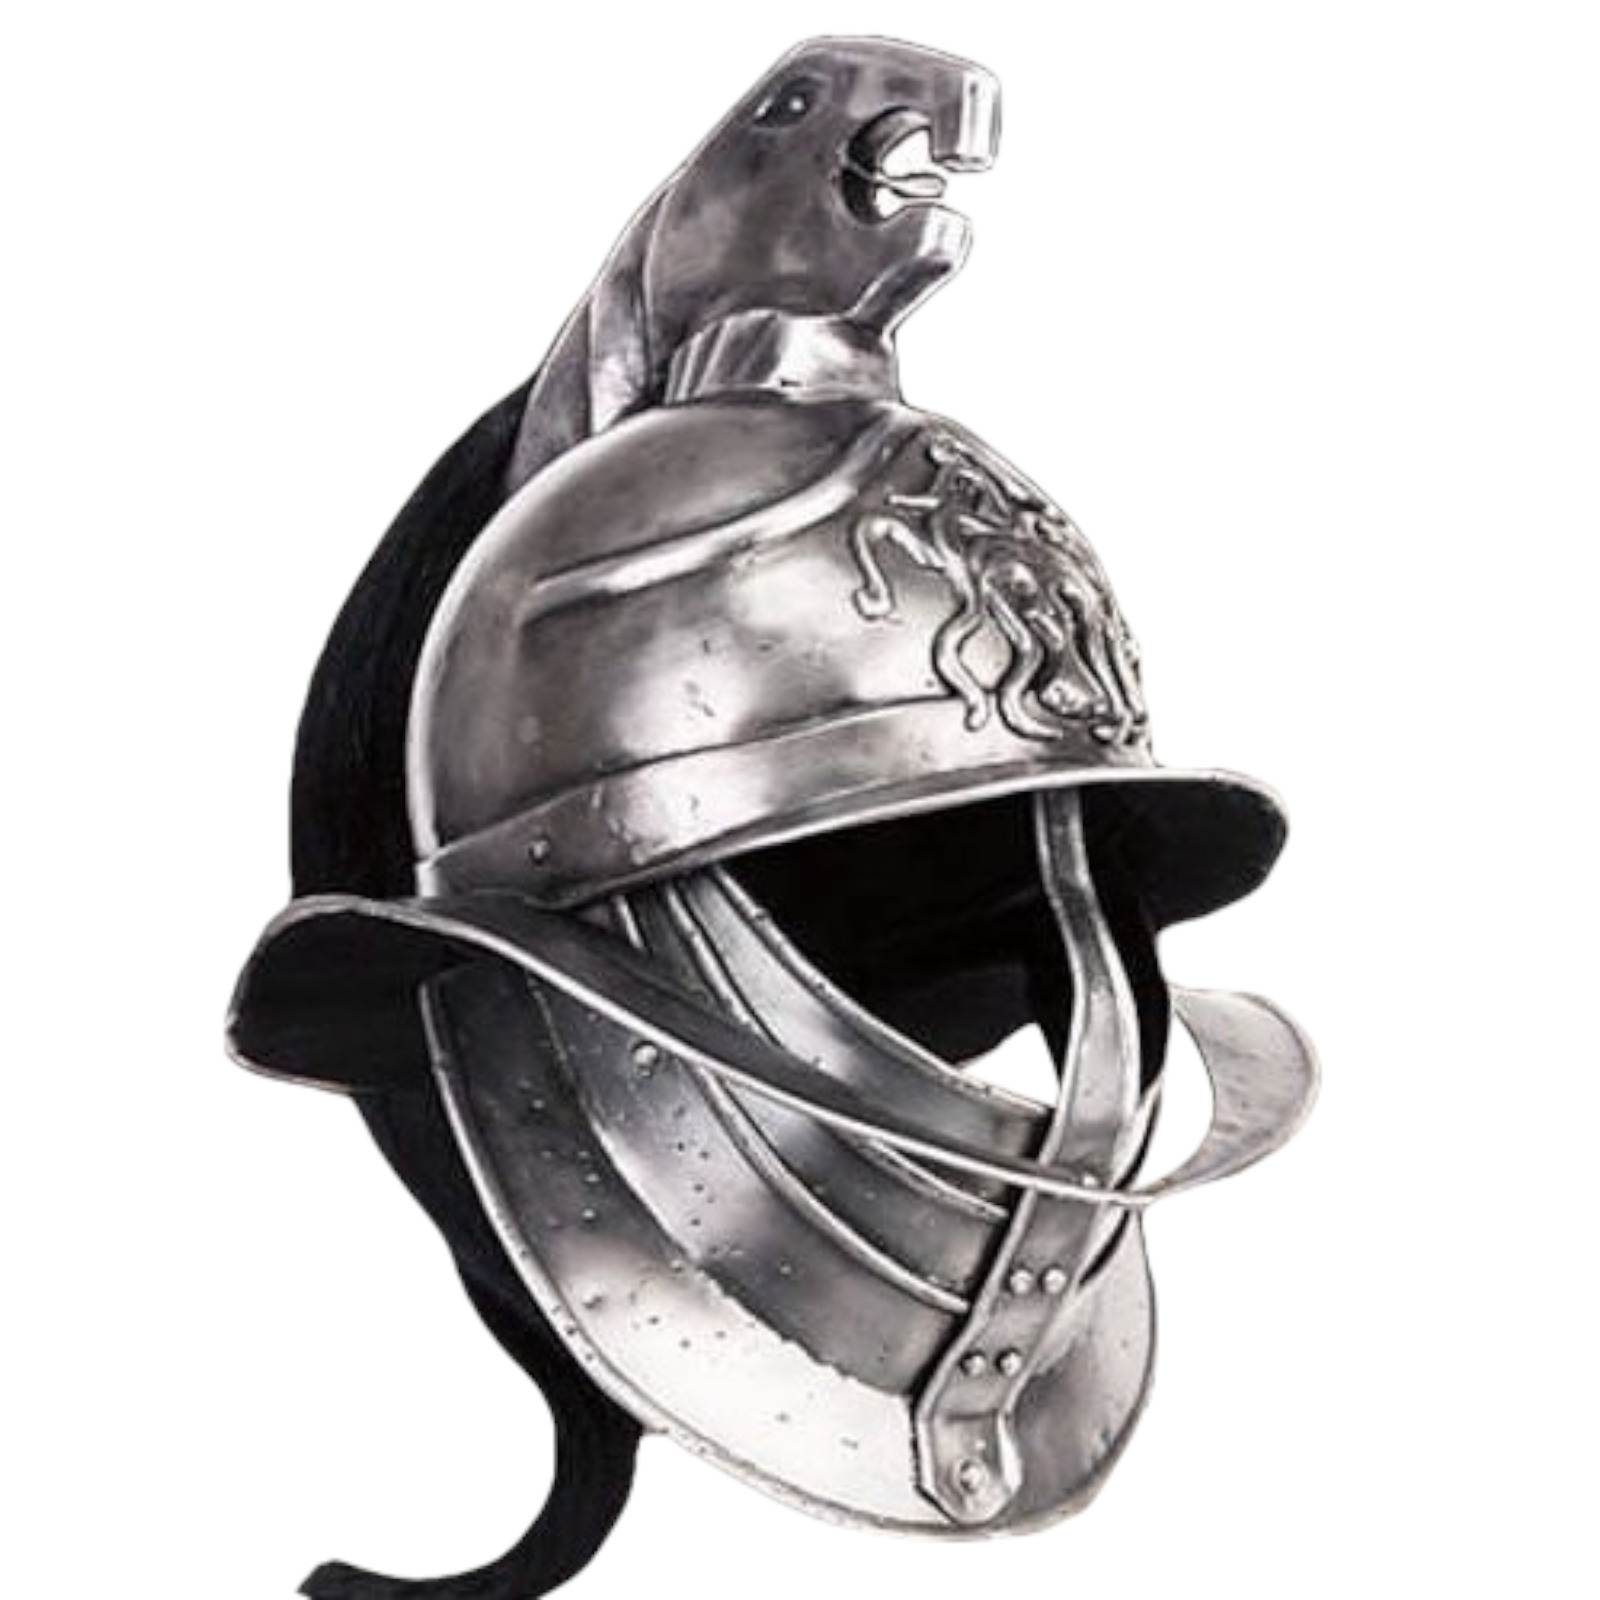 HELMET OF SPARTAKUS FROM THE FILM SPARTACUS BLOOD AND SAND (WS884504)